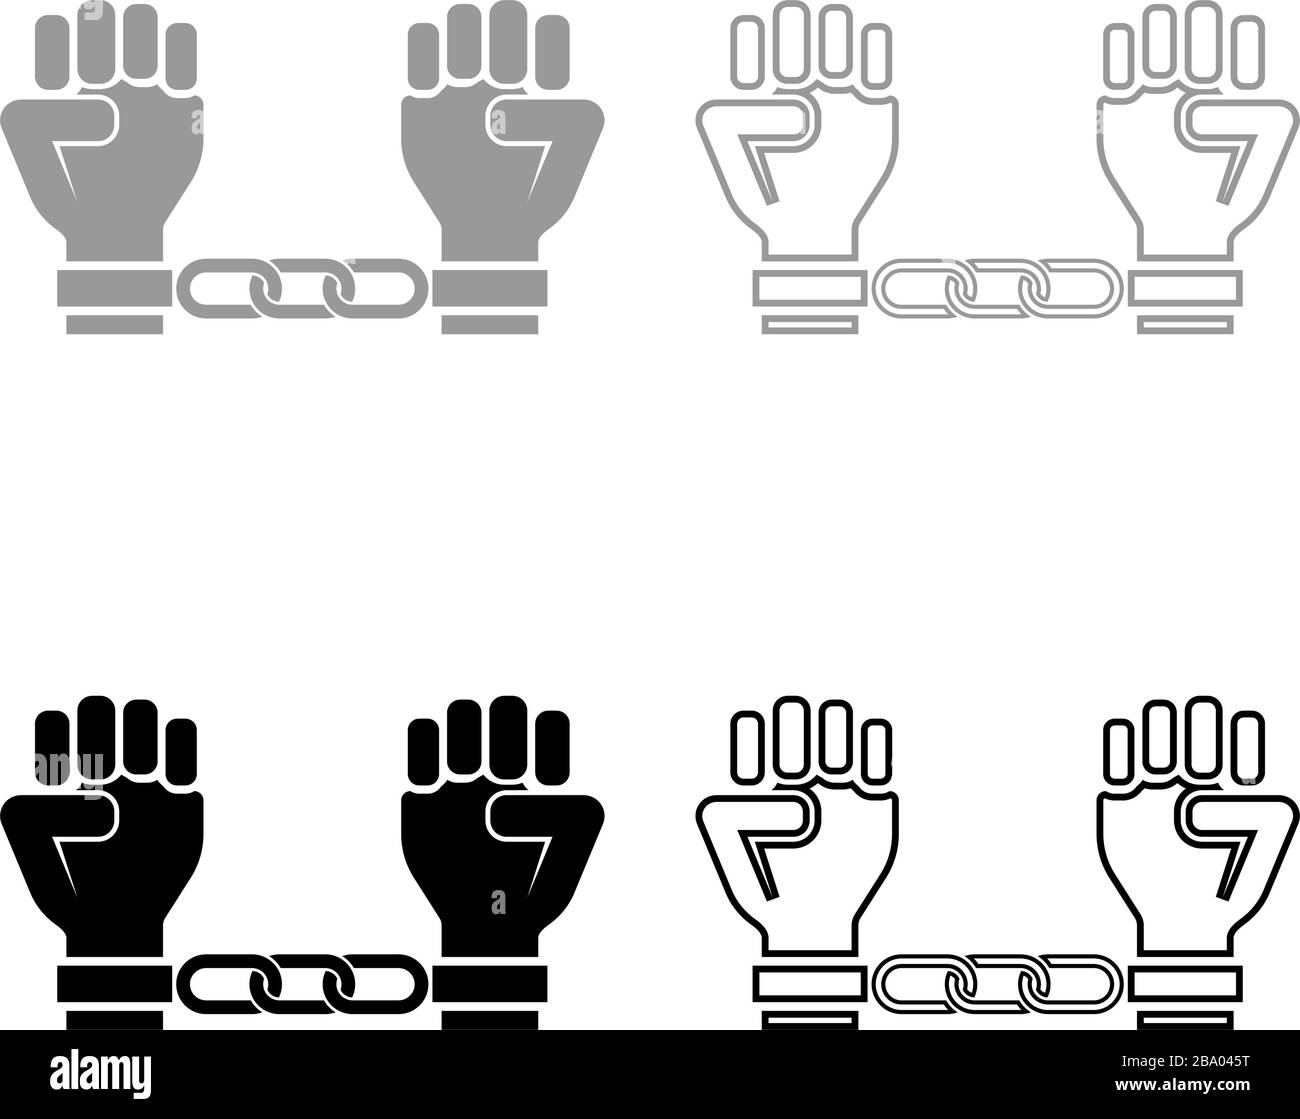 Handcuffed hands Chained human arms Prisoner concept Manacles on man Detention idea Fetters confine Shackles on person icon outline set black grey Stock Vector